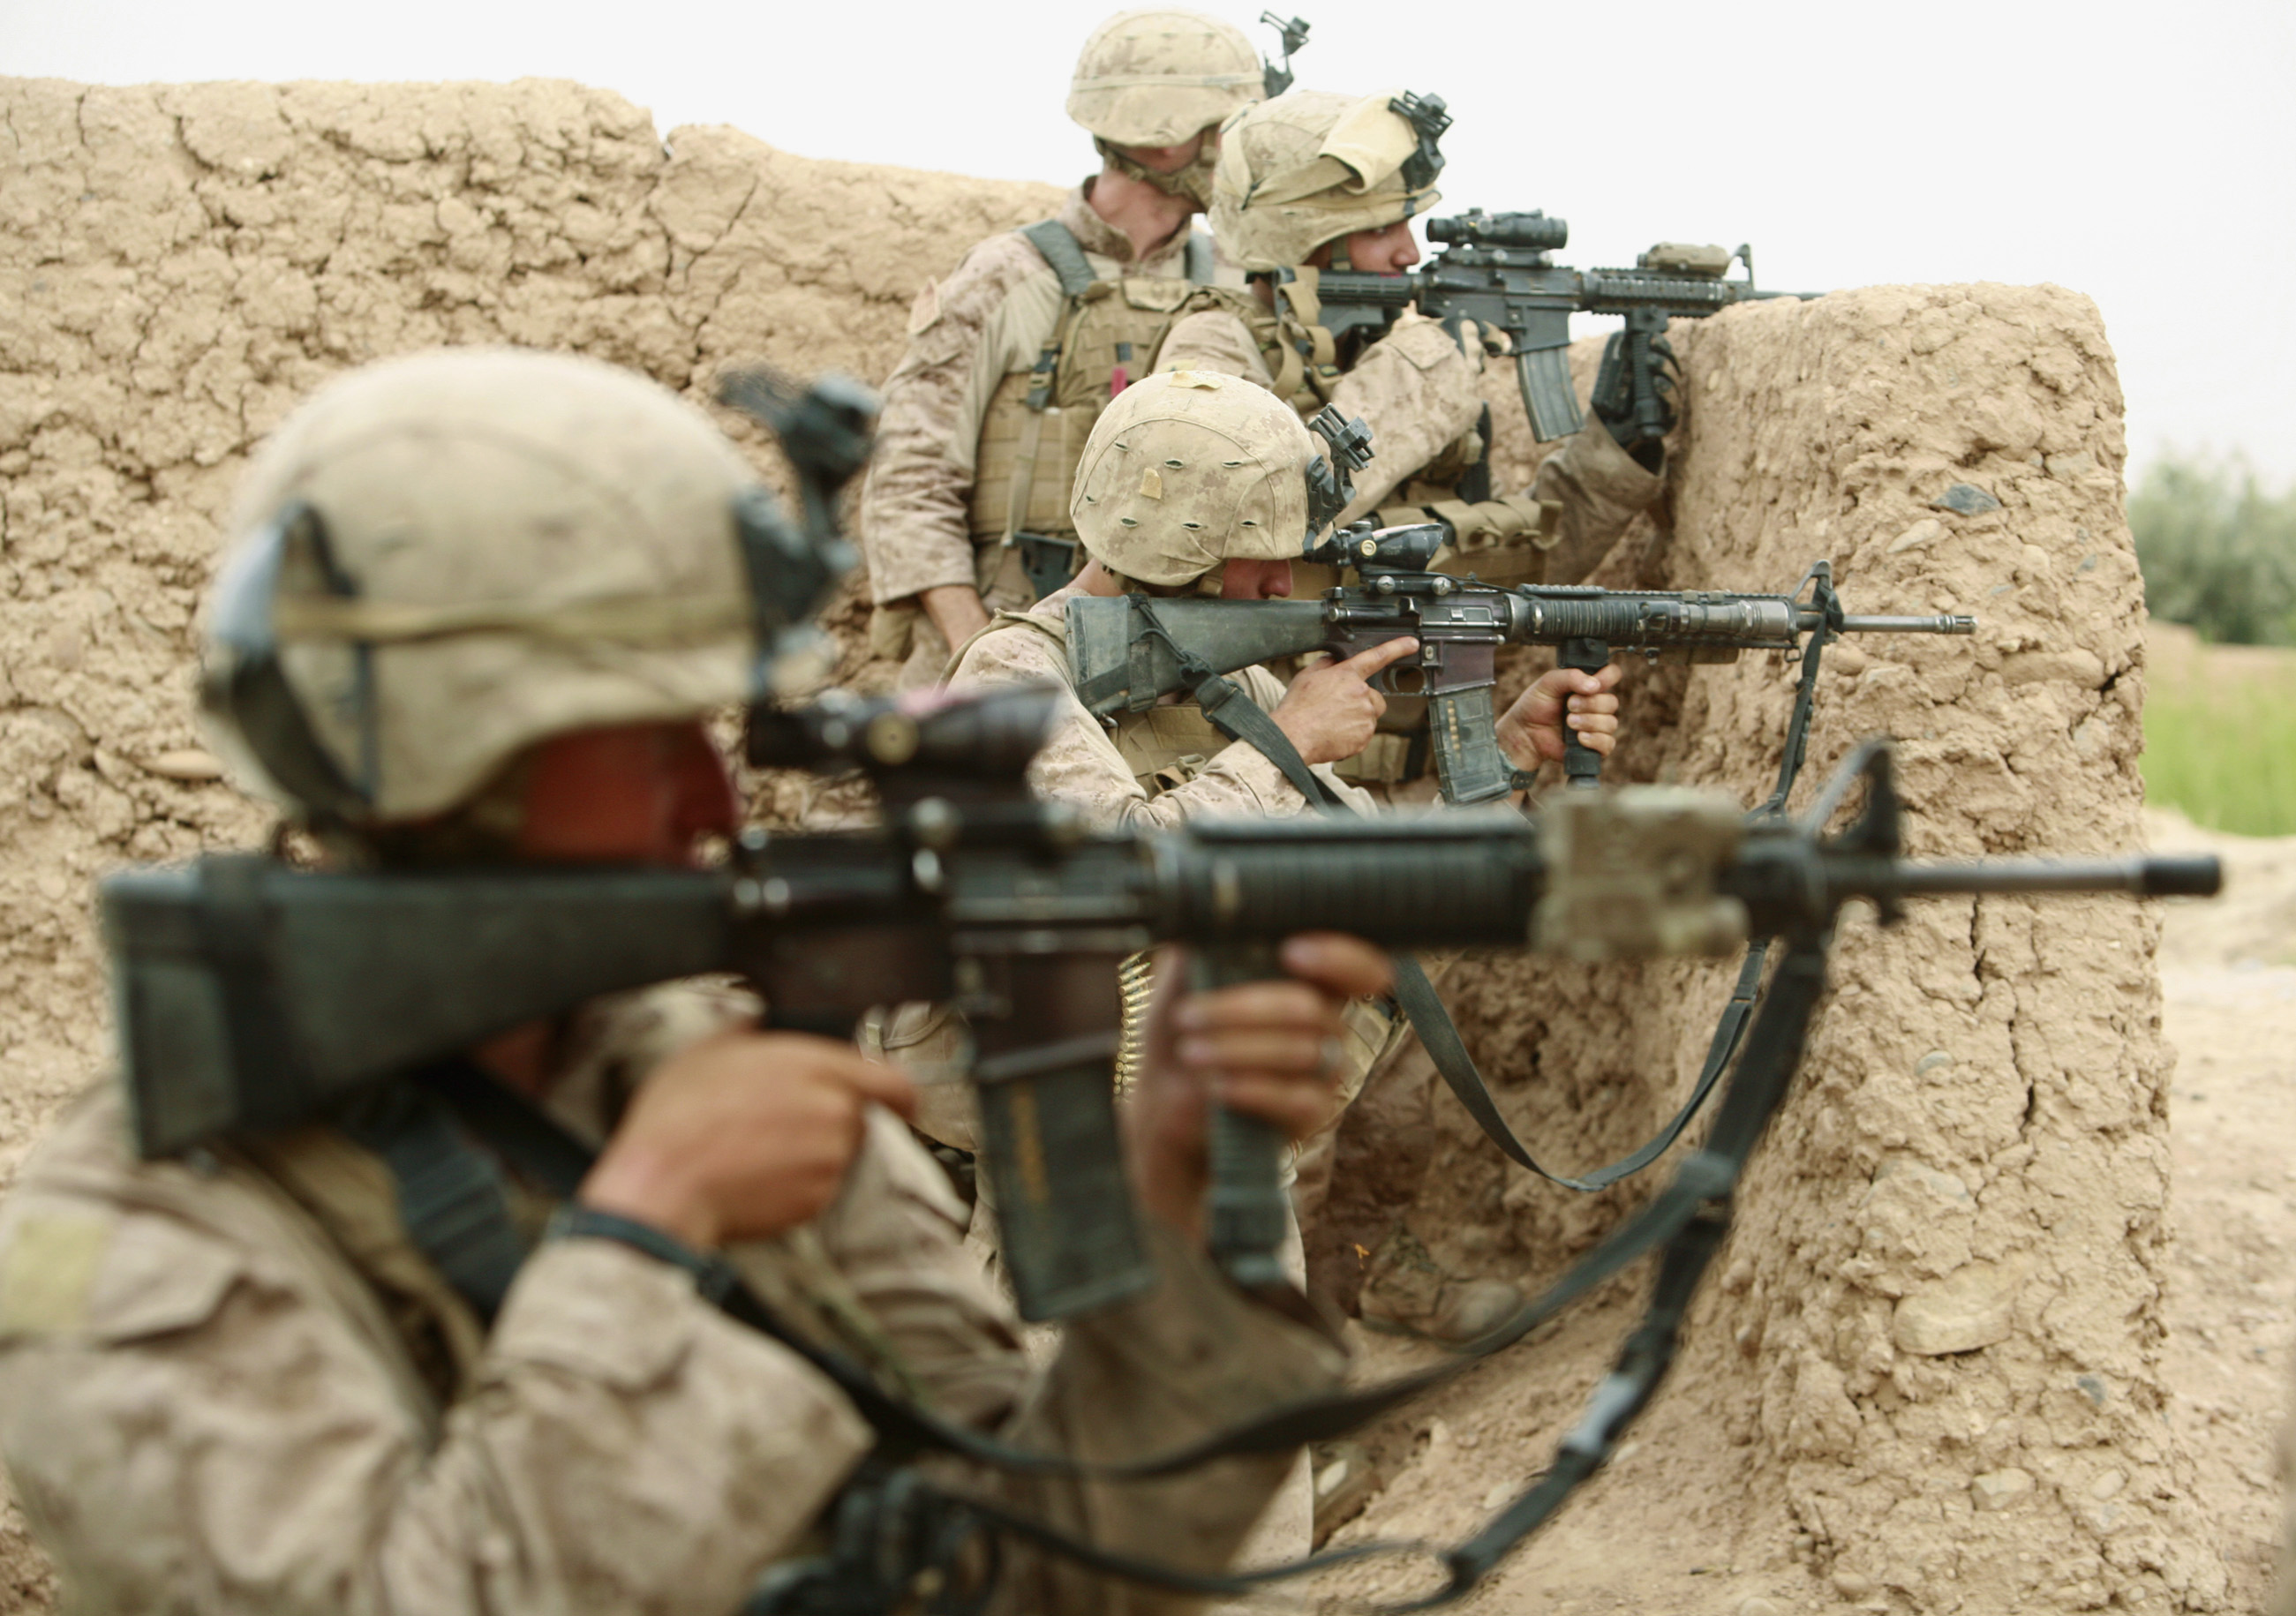 U.S. Marines from Lima Company 3rd Battalion, 6th Marines aim their weapons during a shootout with Taliban fighters in Karez-e-Sayyidi in the outskirts of Marjah district